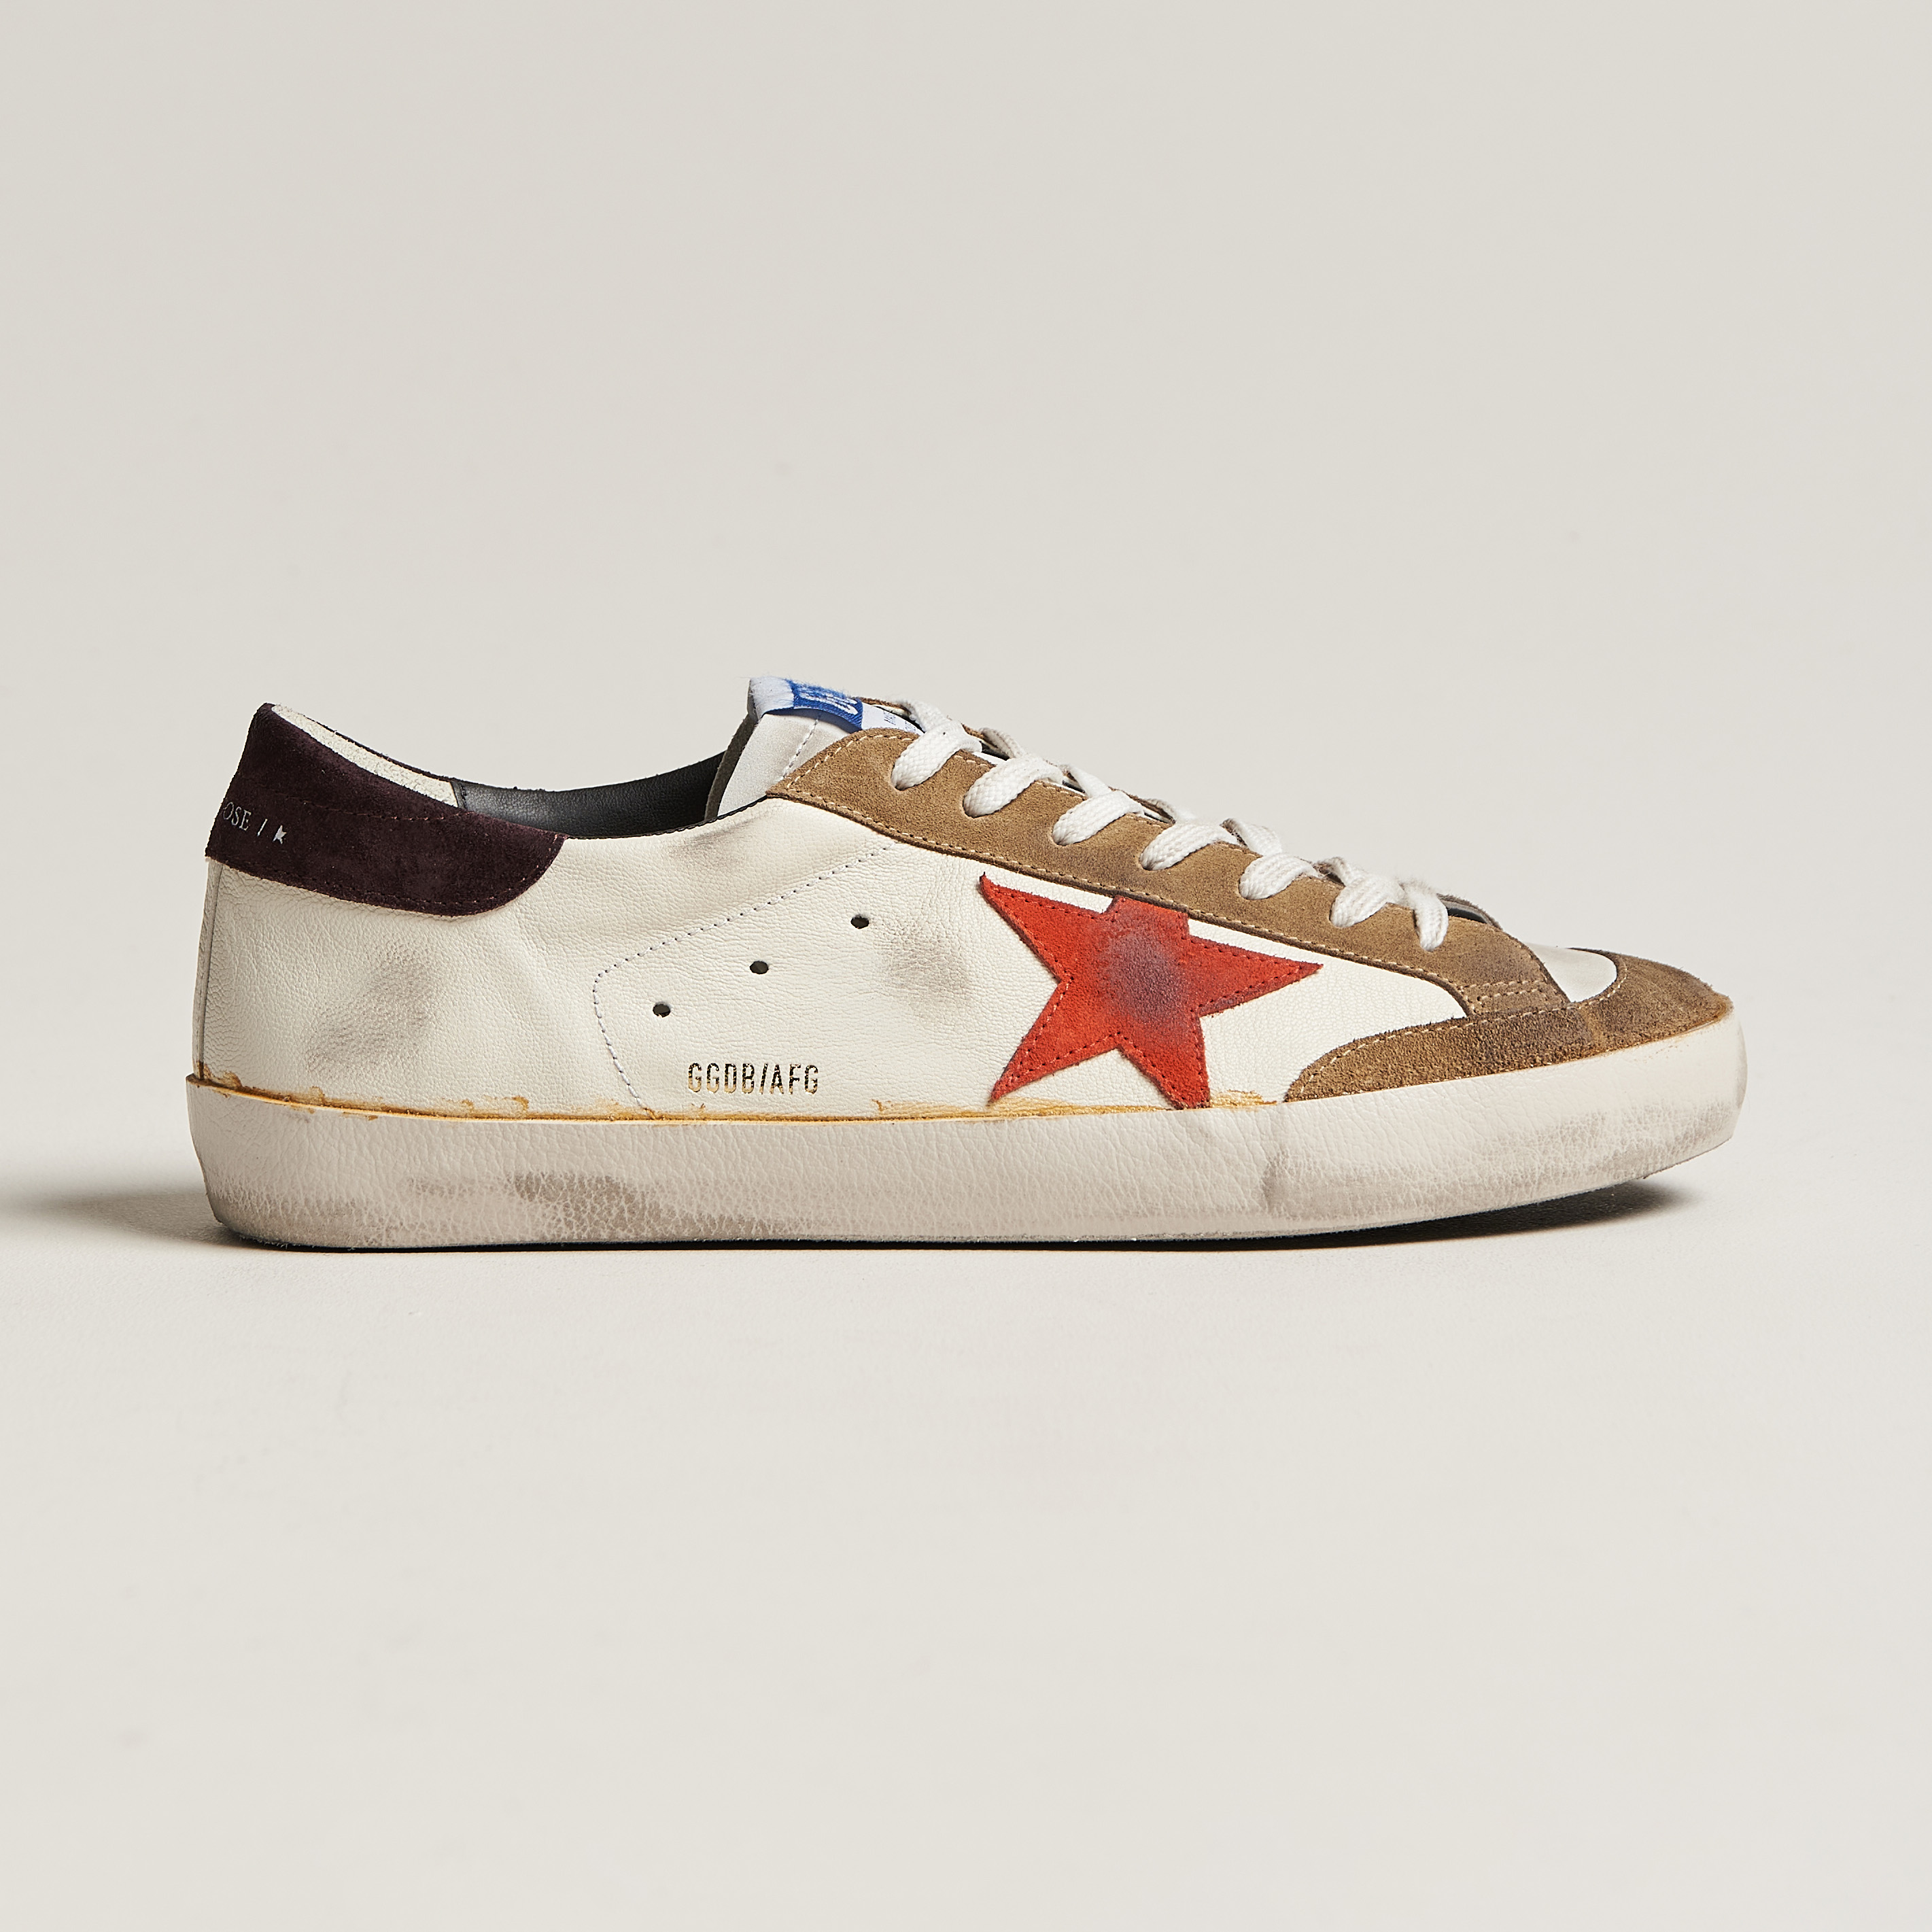 Golden Goose Deluxe Brand Super-Star Sneakers White/Brown at CareOfCarl.com